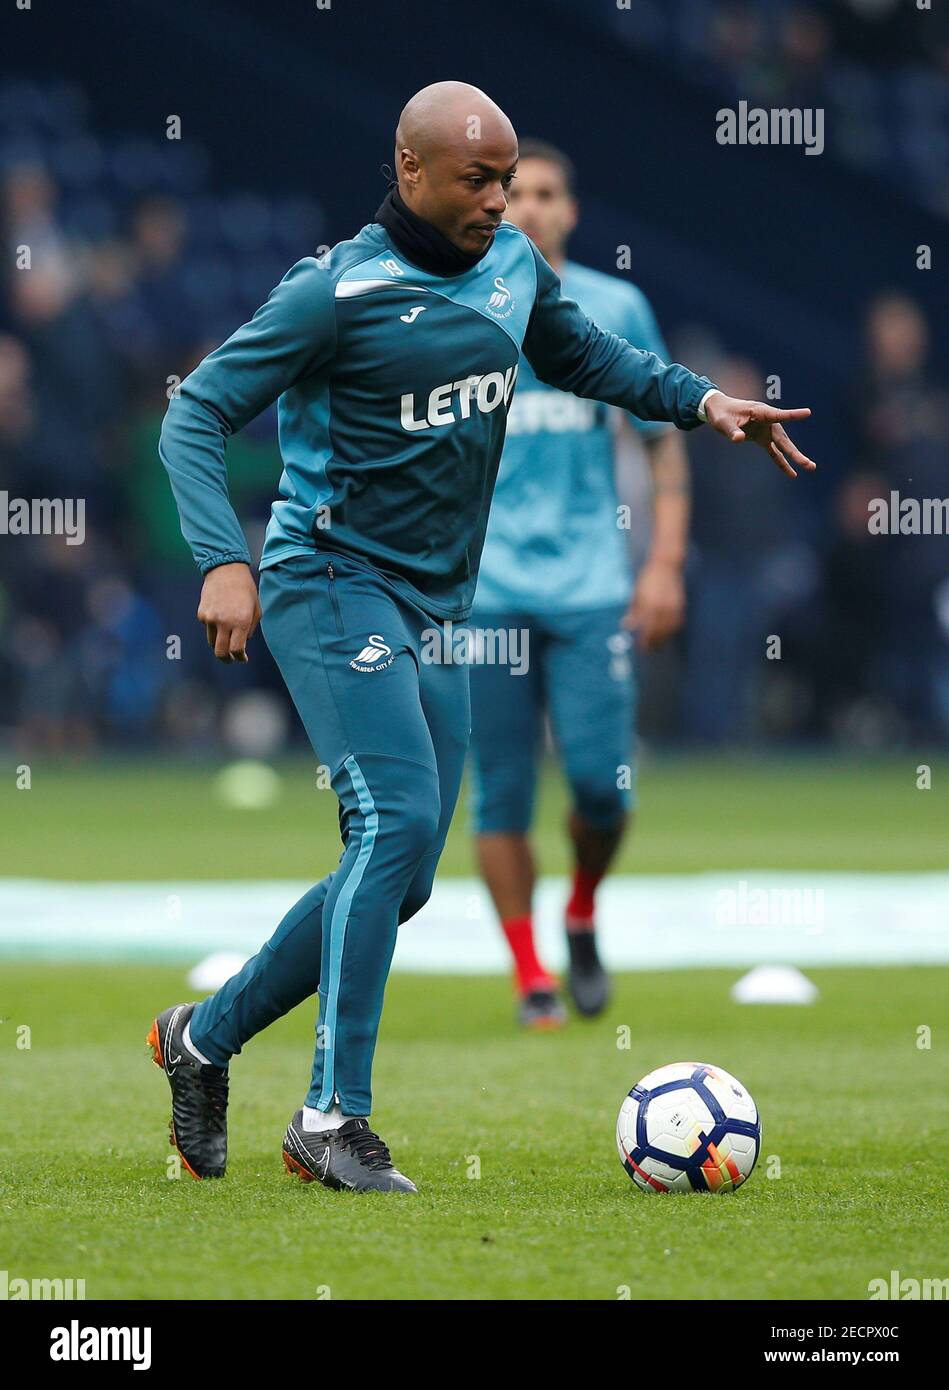 Soccer Football - Premier League - West Bromwich Albion vs Swansea City - The Hawthorns, West Bromwich, Britain - April 7, 2018   Swansea City's Andre Ayew during the warm up before the match    REUTERS/Andrew Yates    EDITORIAL USE ONLY. No use with unauthorized audio, video, data, fixture lists, club/league logos or 'live' services. Online in-match use limited to 75 images, no video emulation. No use in betting, games or single club/league/player publications.  Please contact your account representative for further details. Stock Photo